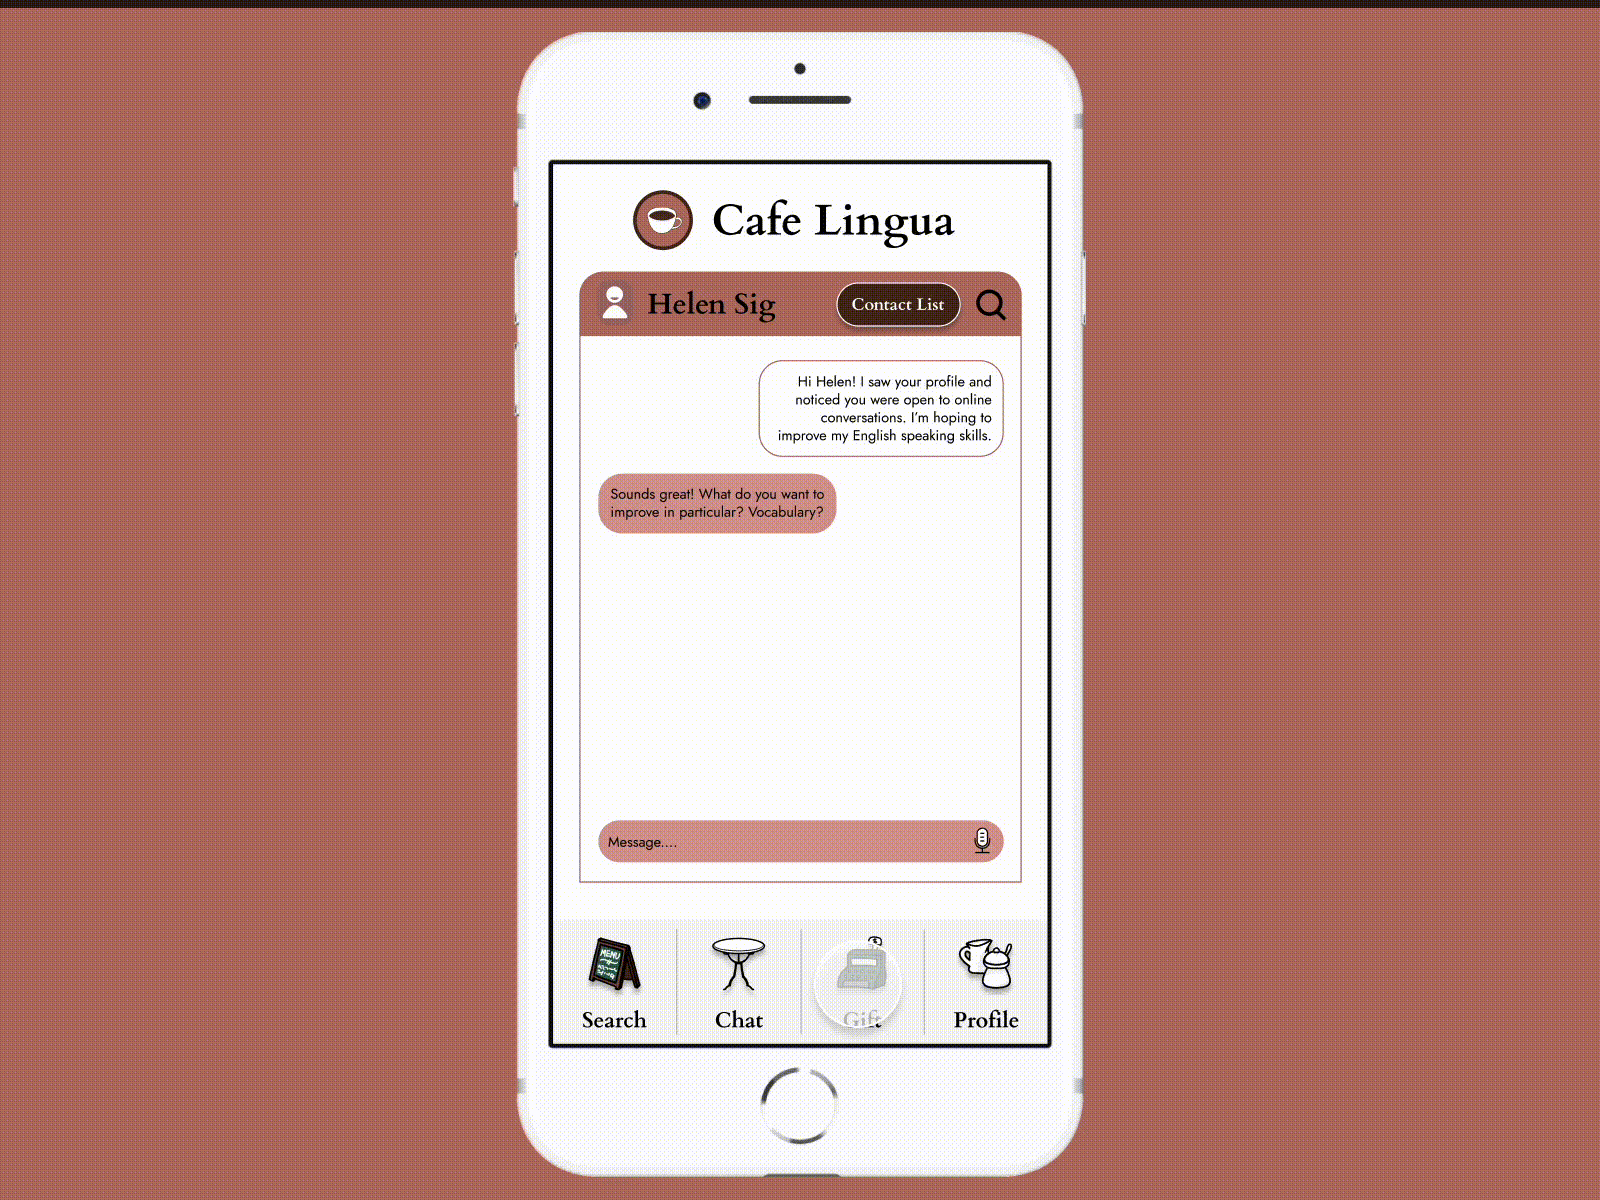 Cafe Lingua - Pay and Log Out